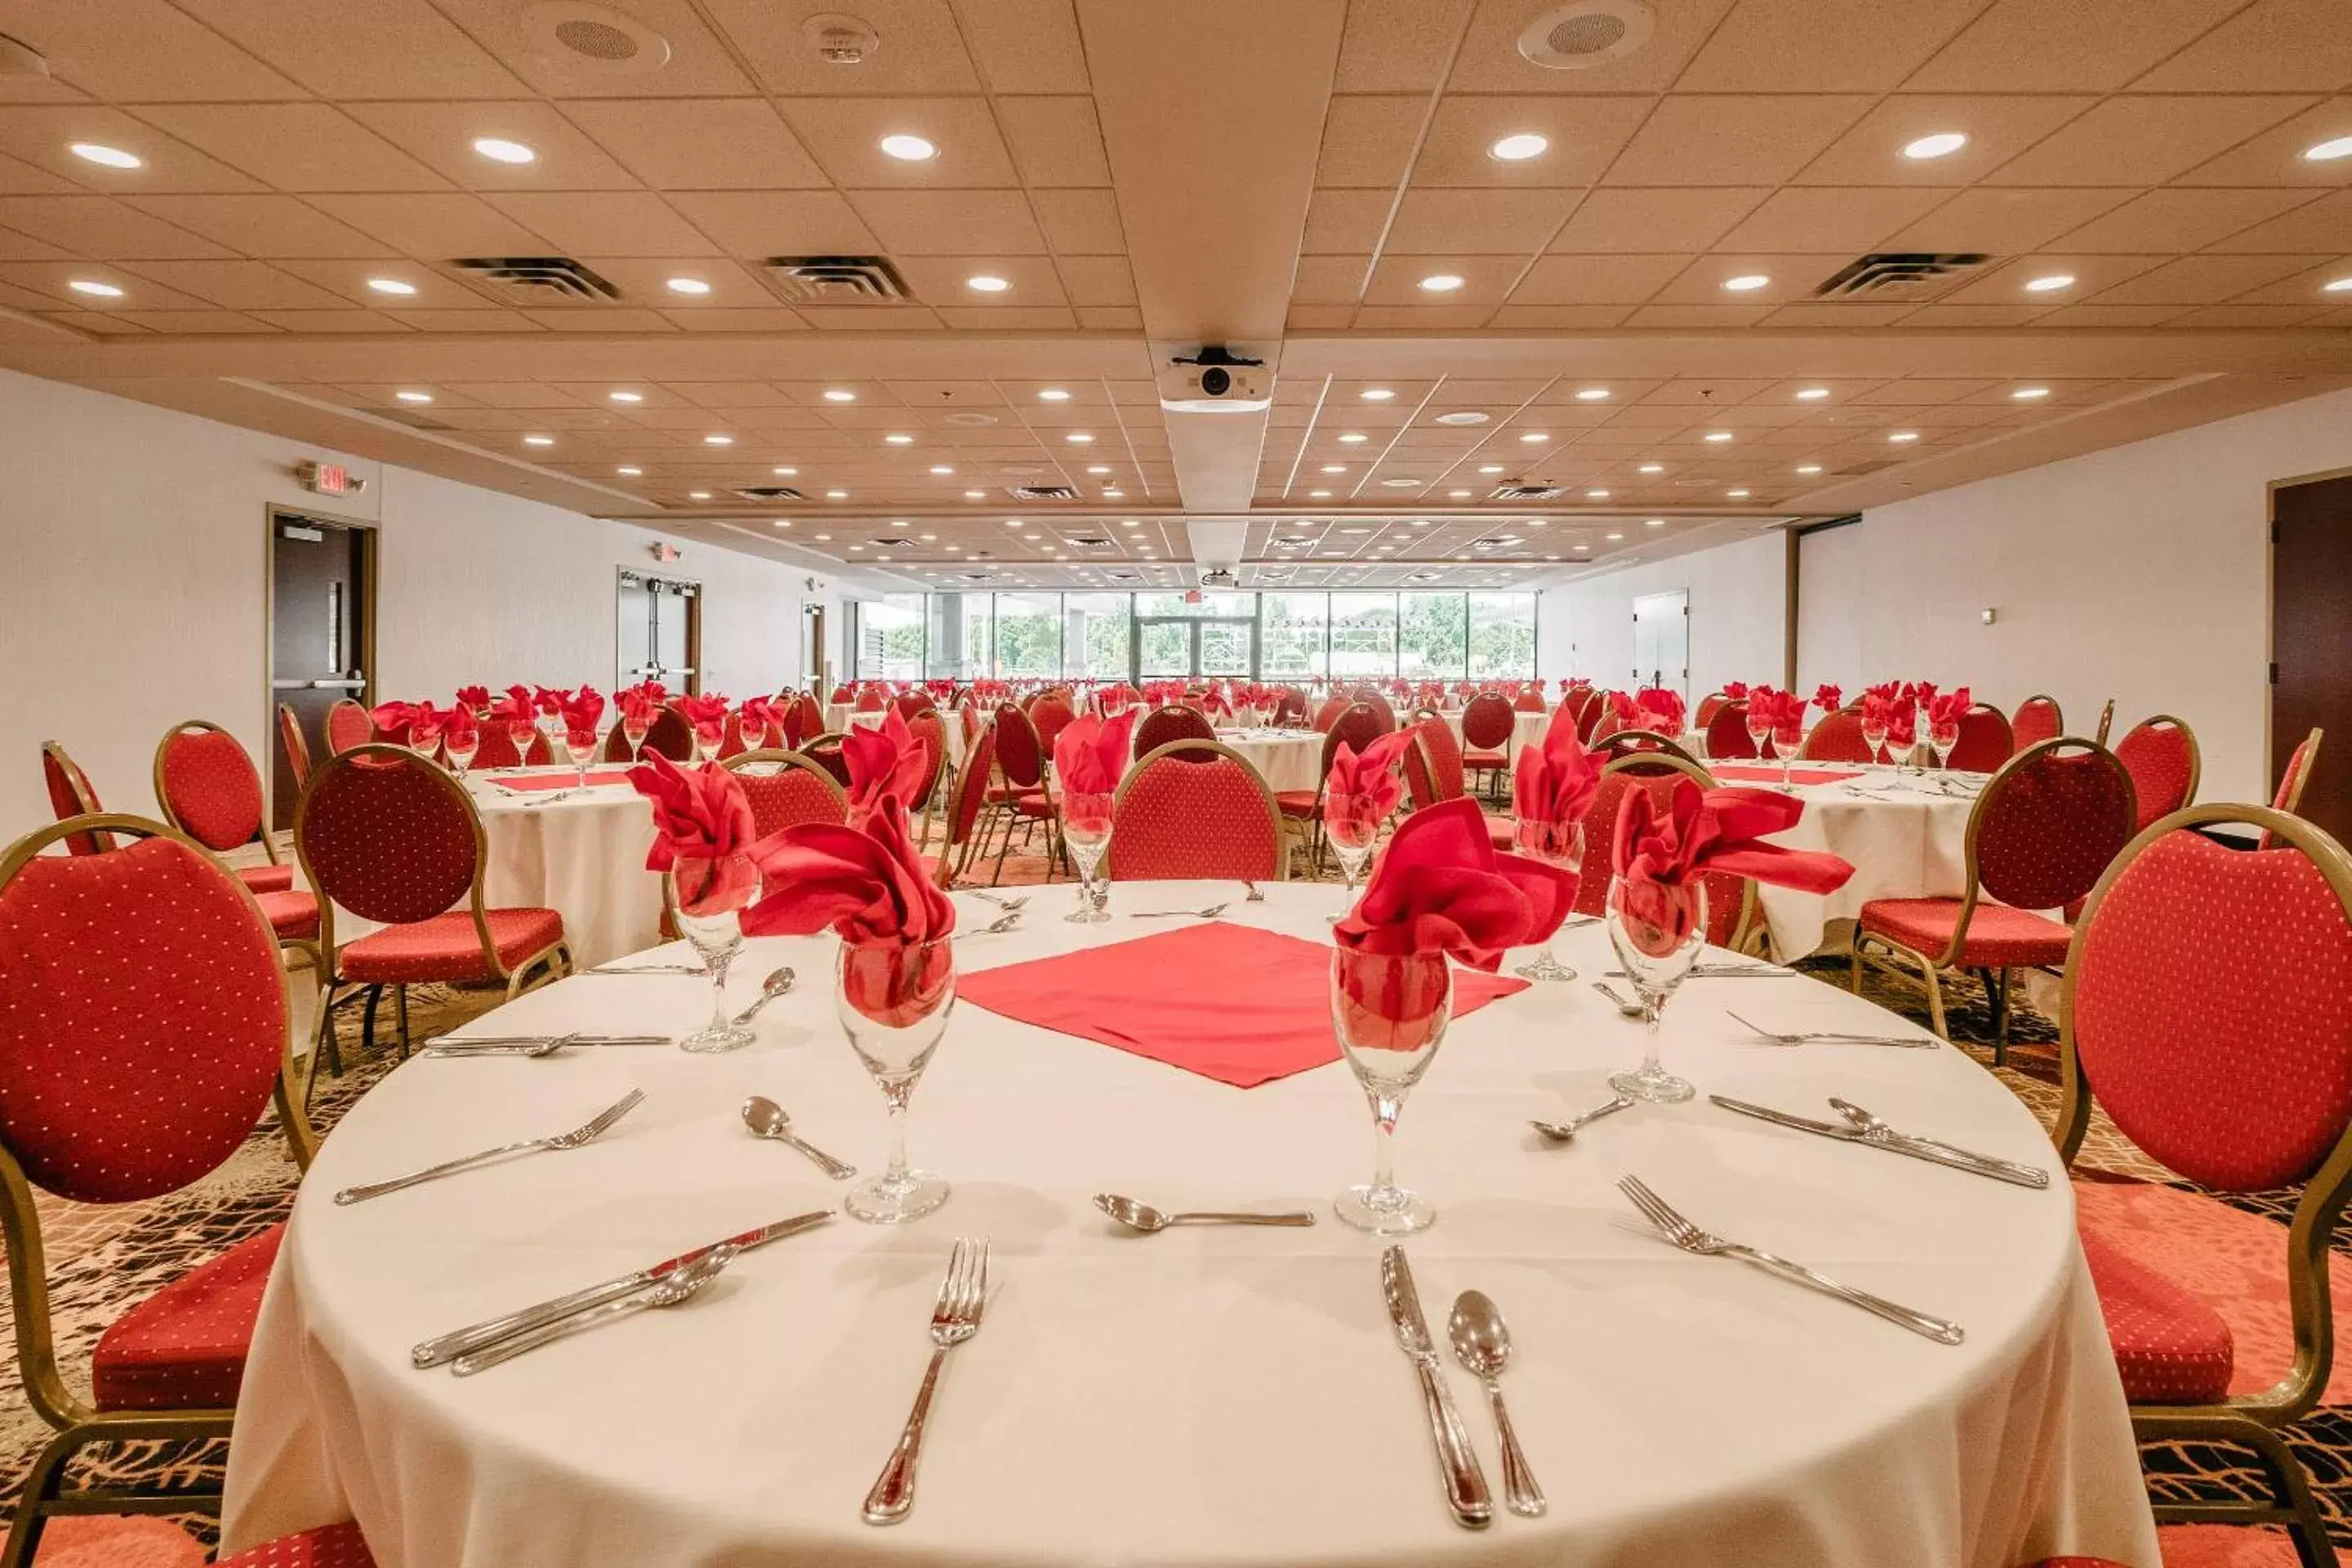 Banquet/Function facilities, Banquet Facilities in Radisson Hotel St Paul Downtown